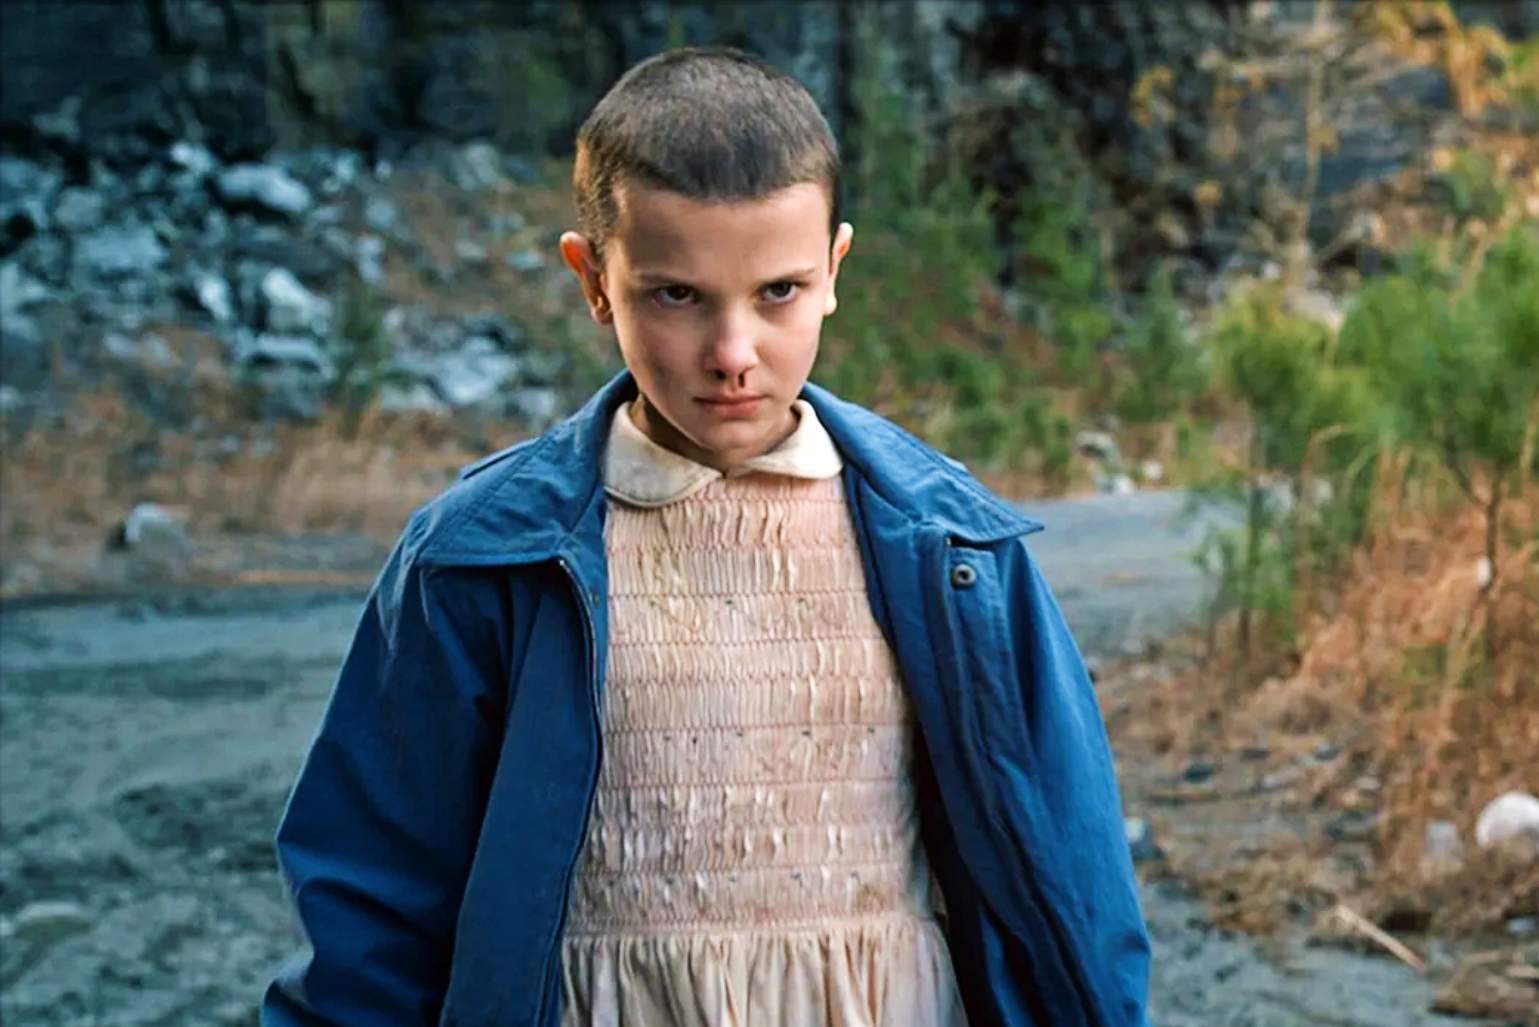 Spanish-born British/American actress Millie Bobby Brown as Eleven in Season One